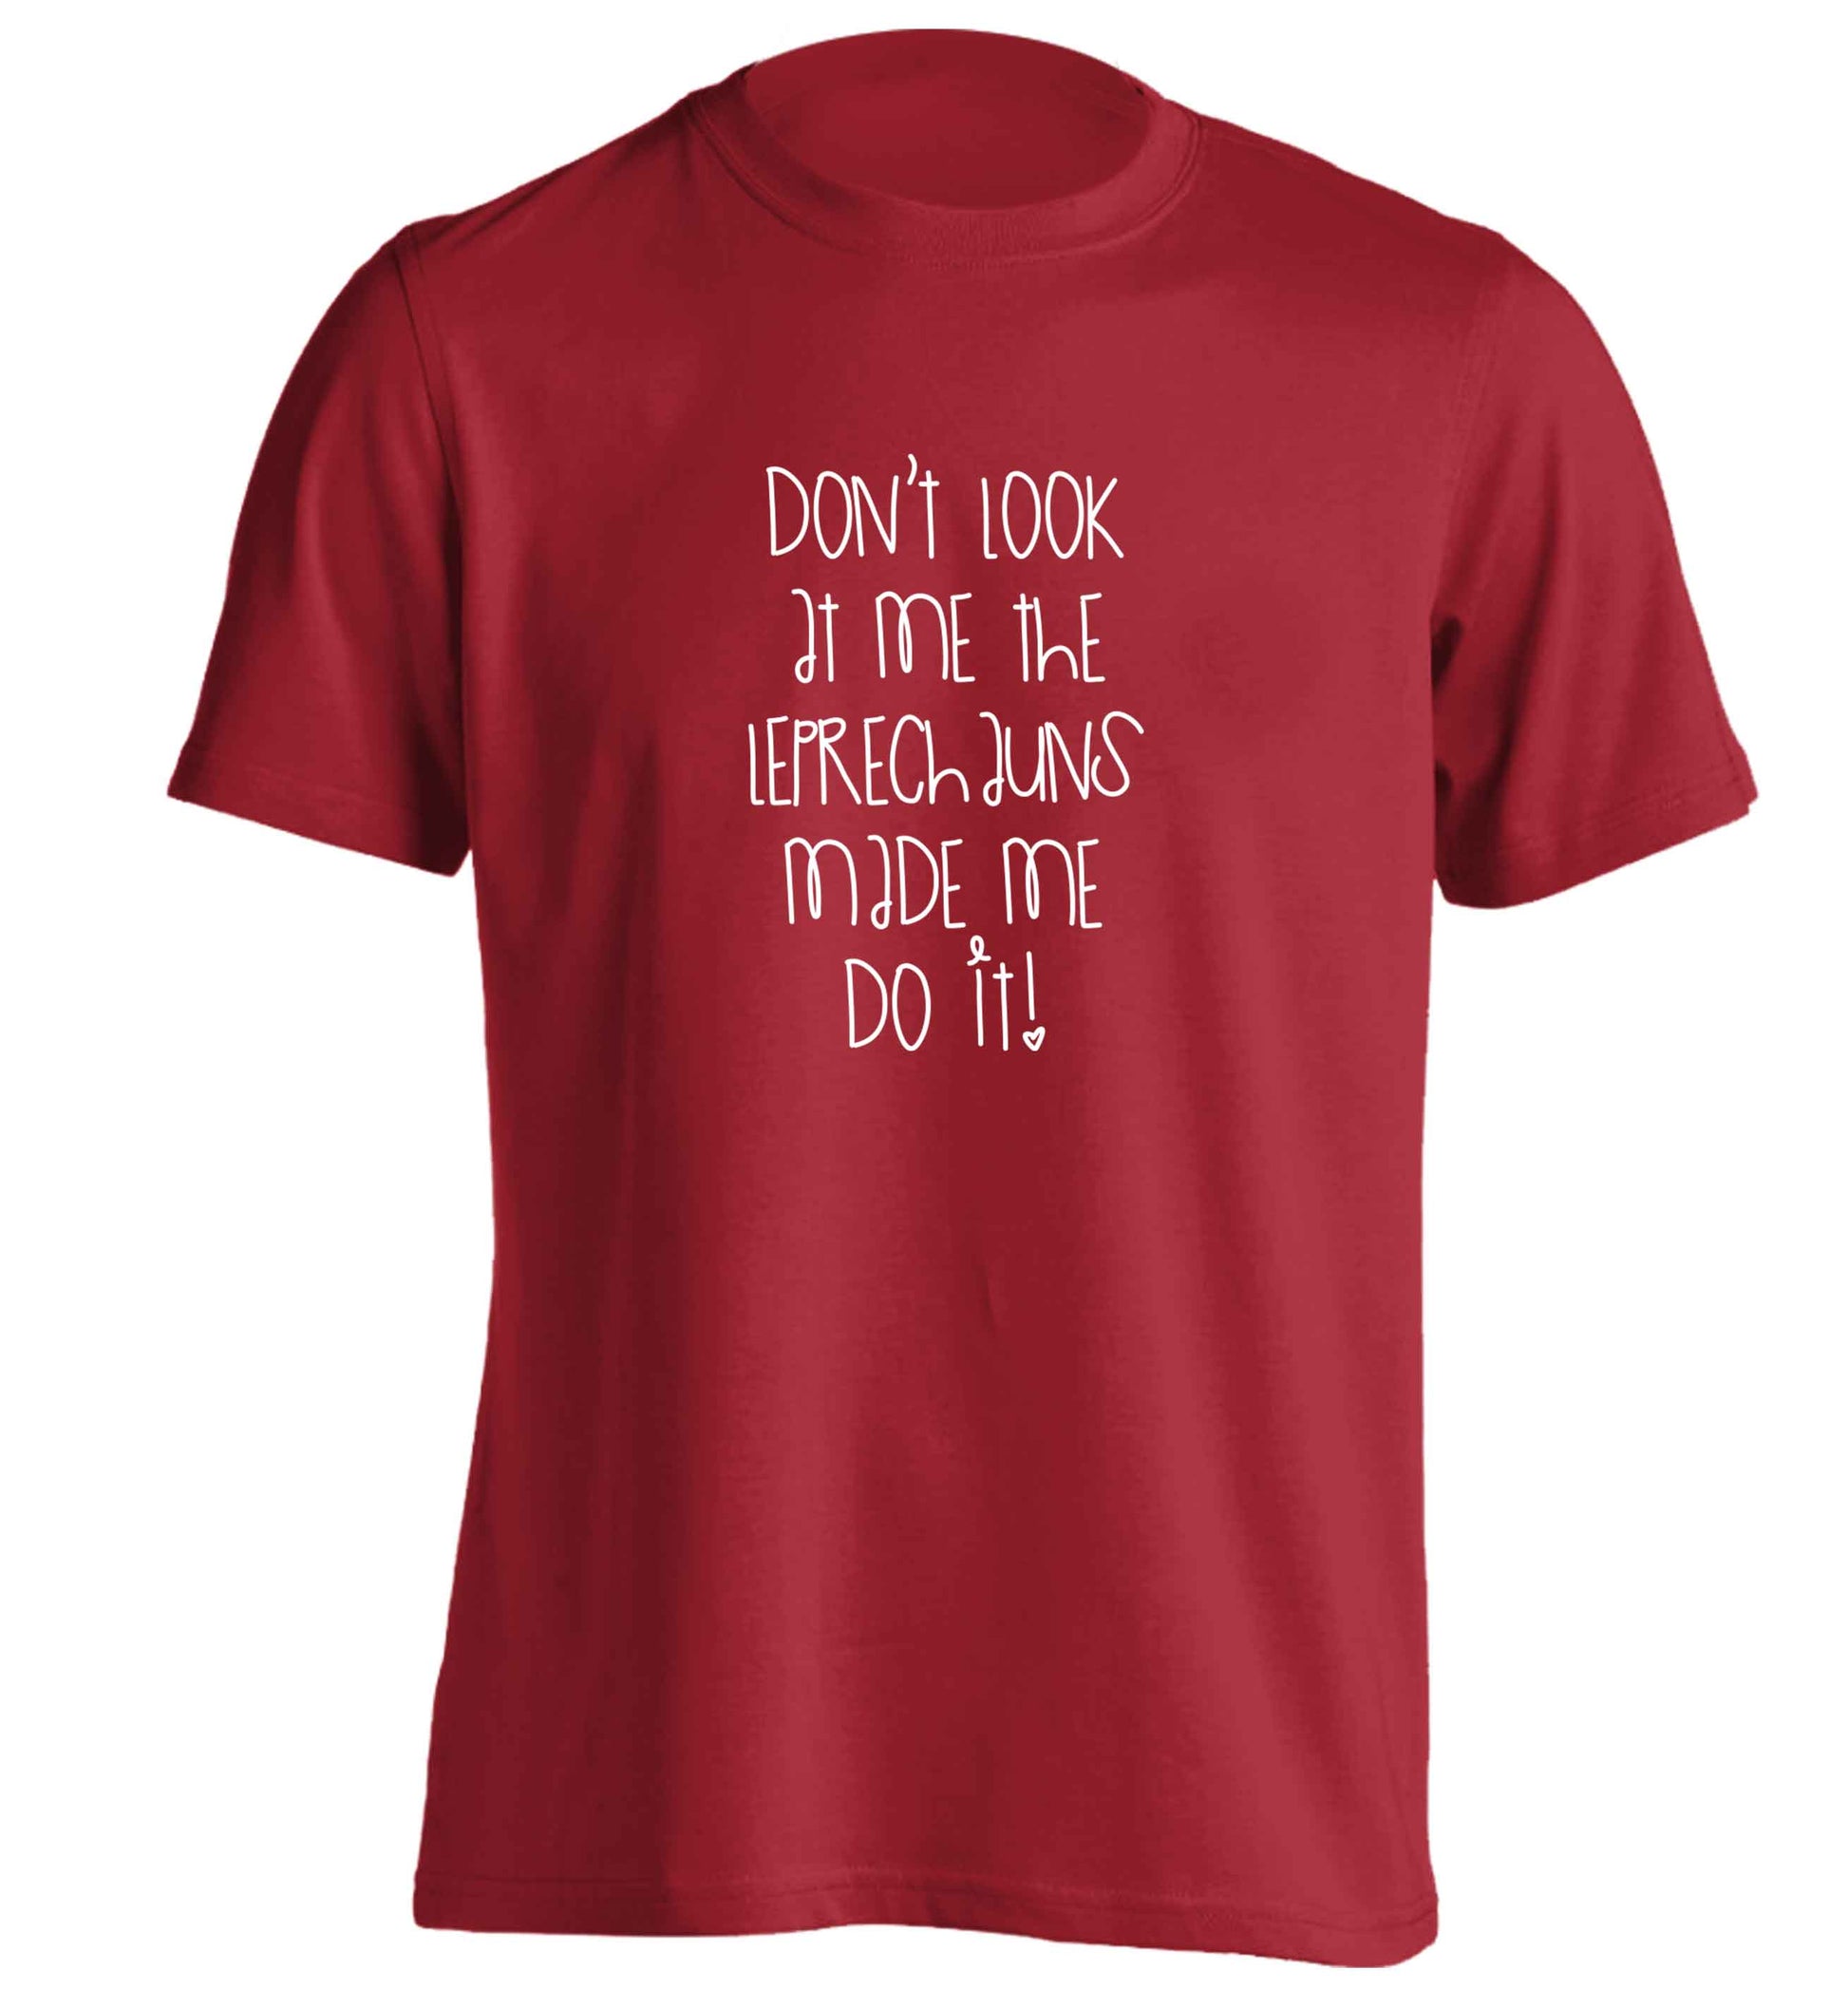 Don't look at me the leprechauns made me do it adults unisex red Tshirt 2XL